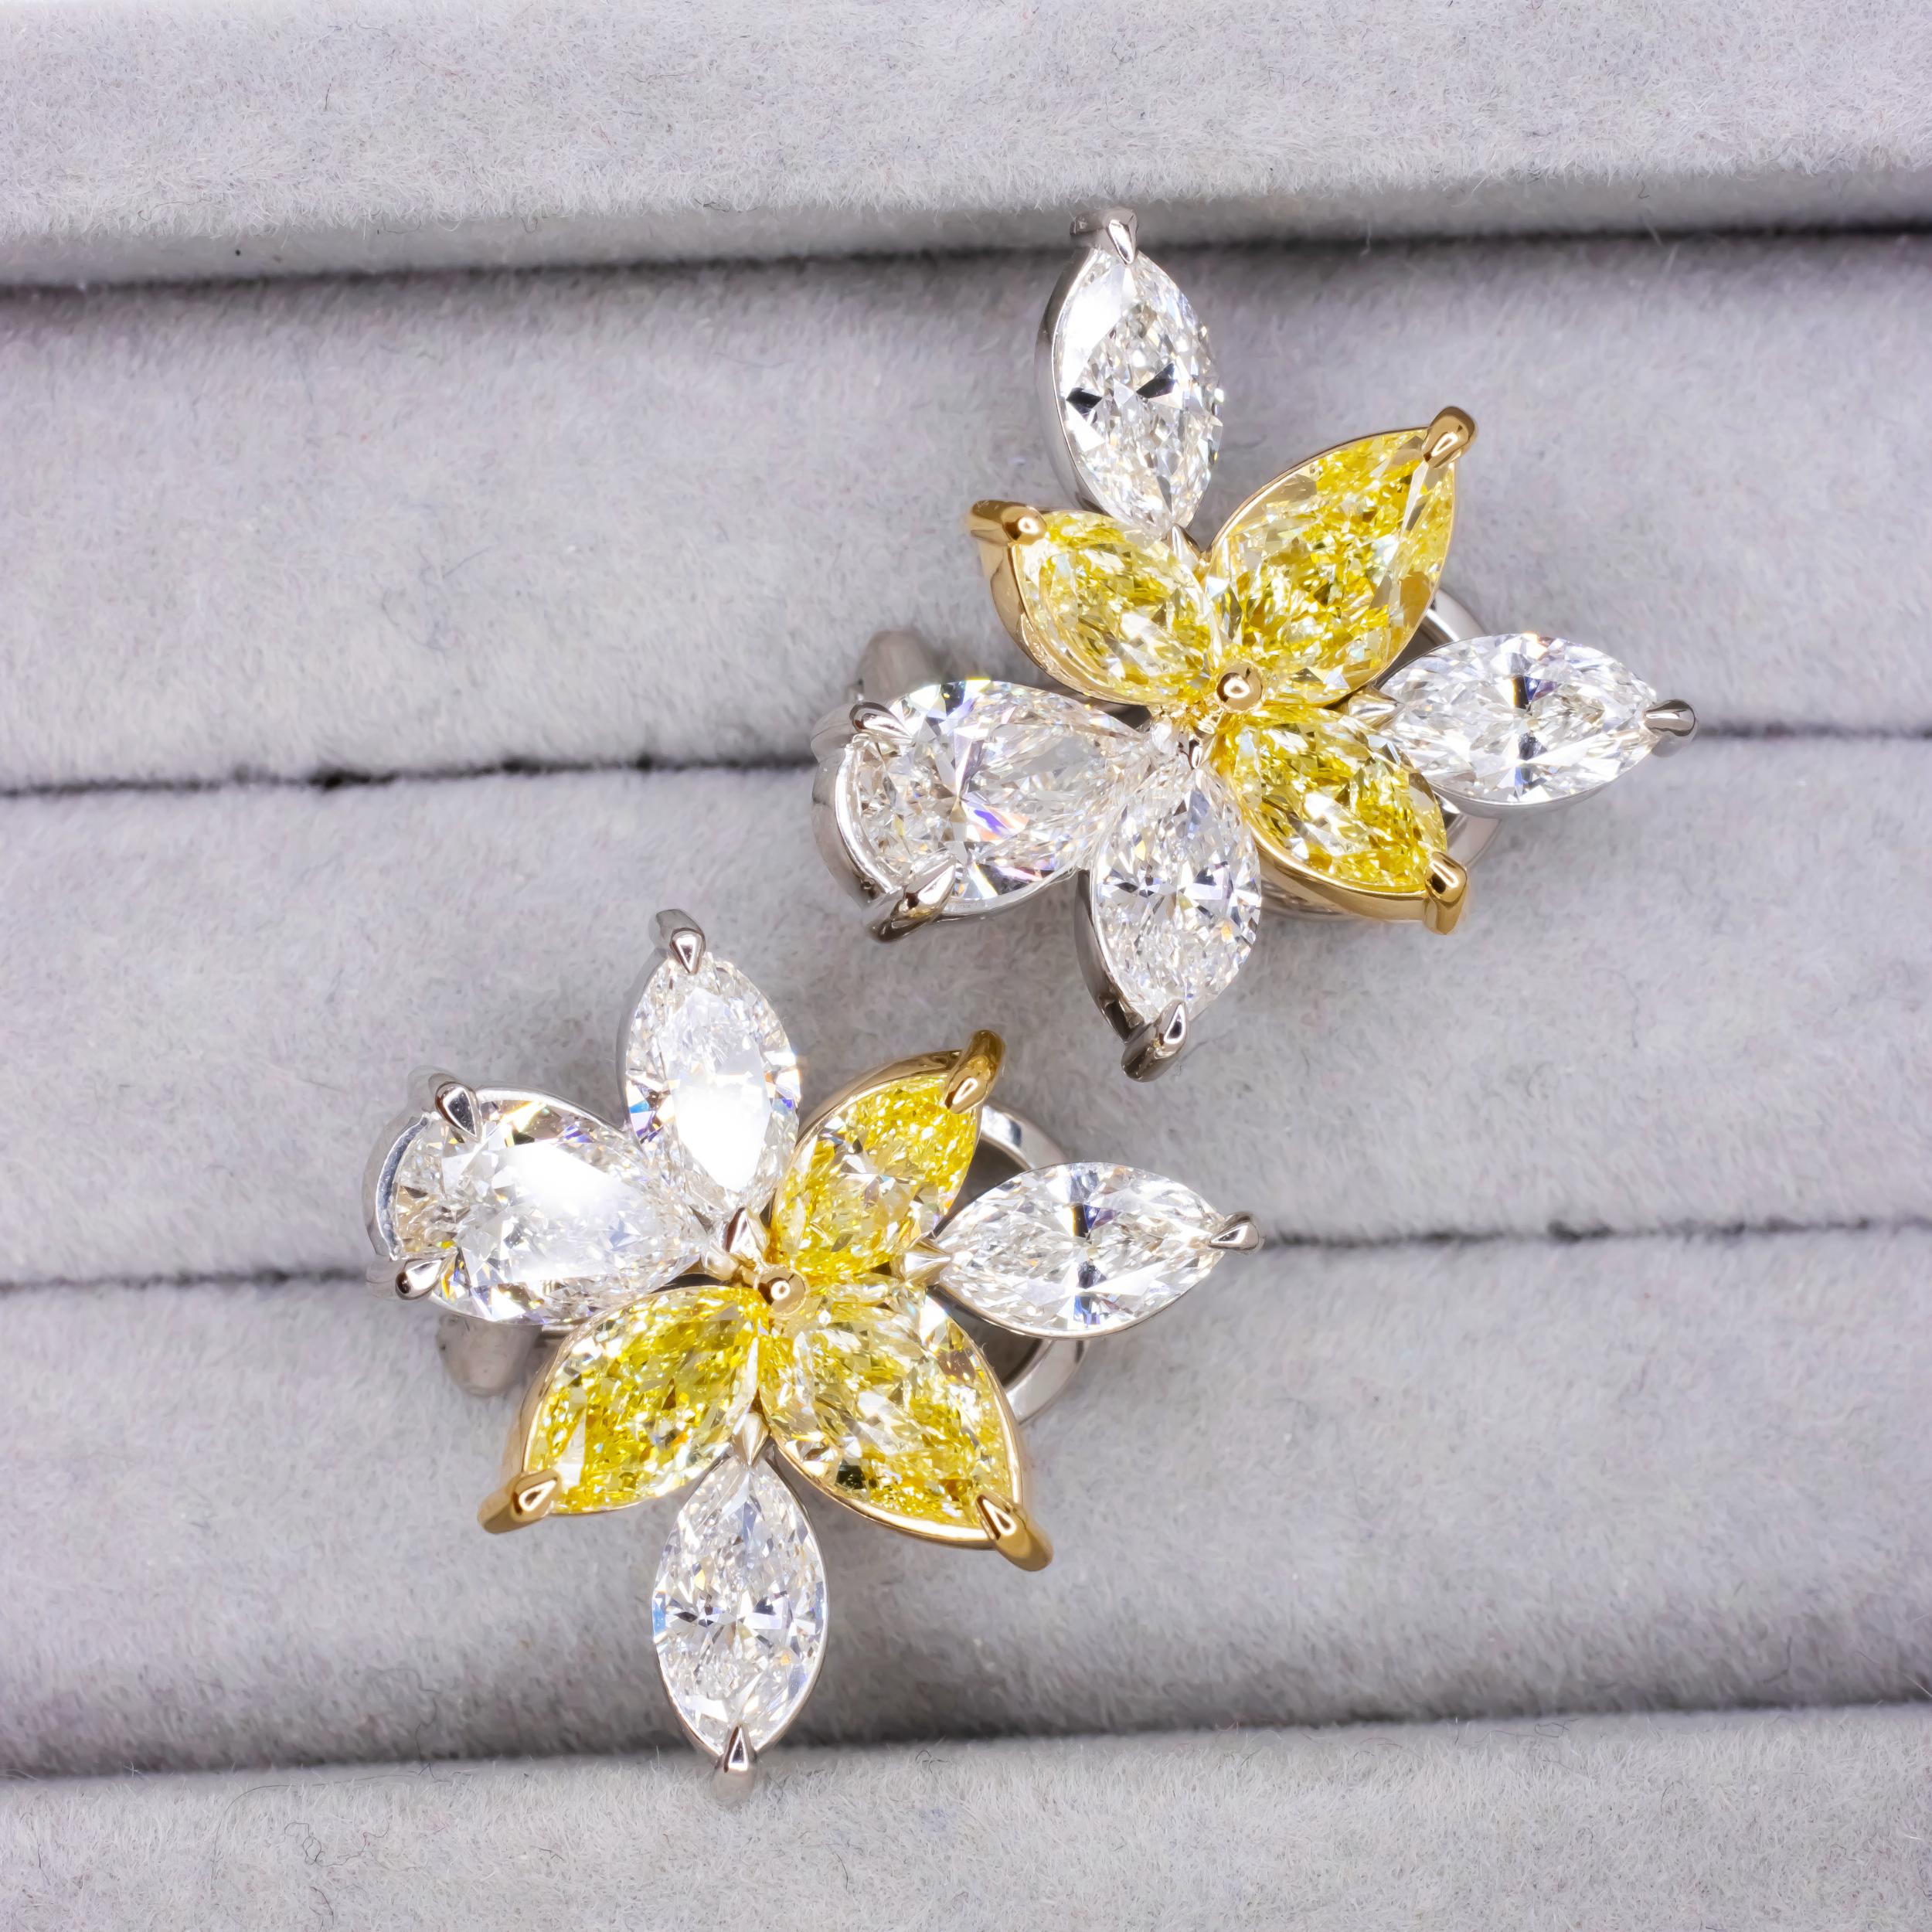 Indulge in the enchanting allure of these GIA Certified 5.60 Carat Fancy Yellow and White Diamond Platinum Cluster Earrings. A symphony of shapes unfolds as marquise and pear diamonds dance together, intricately set in platinum. Adding a touch of